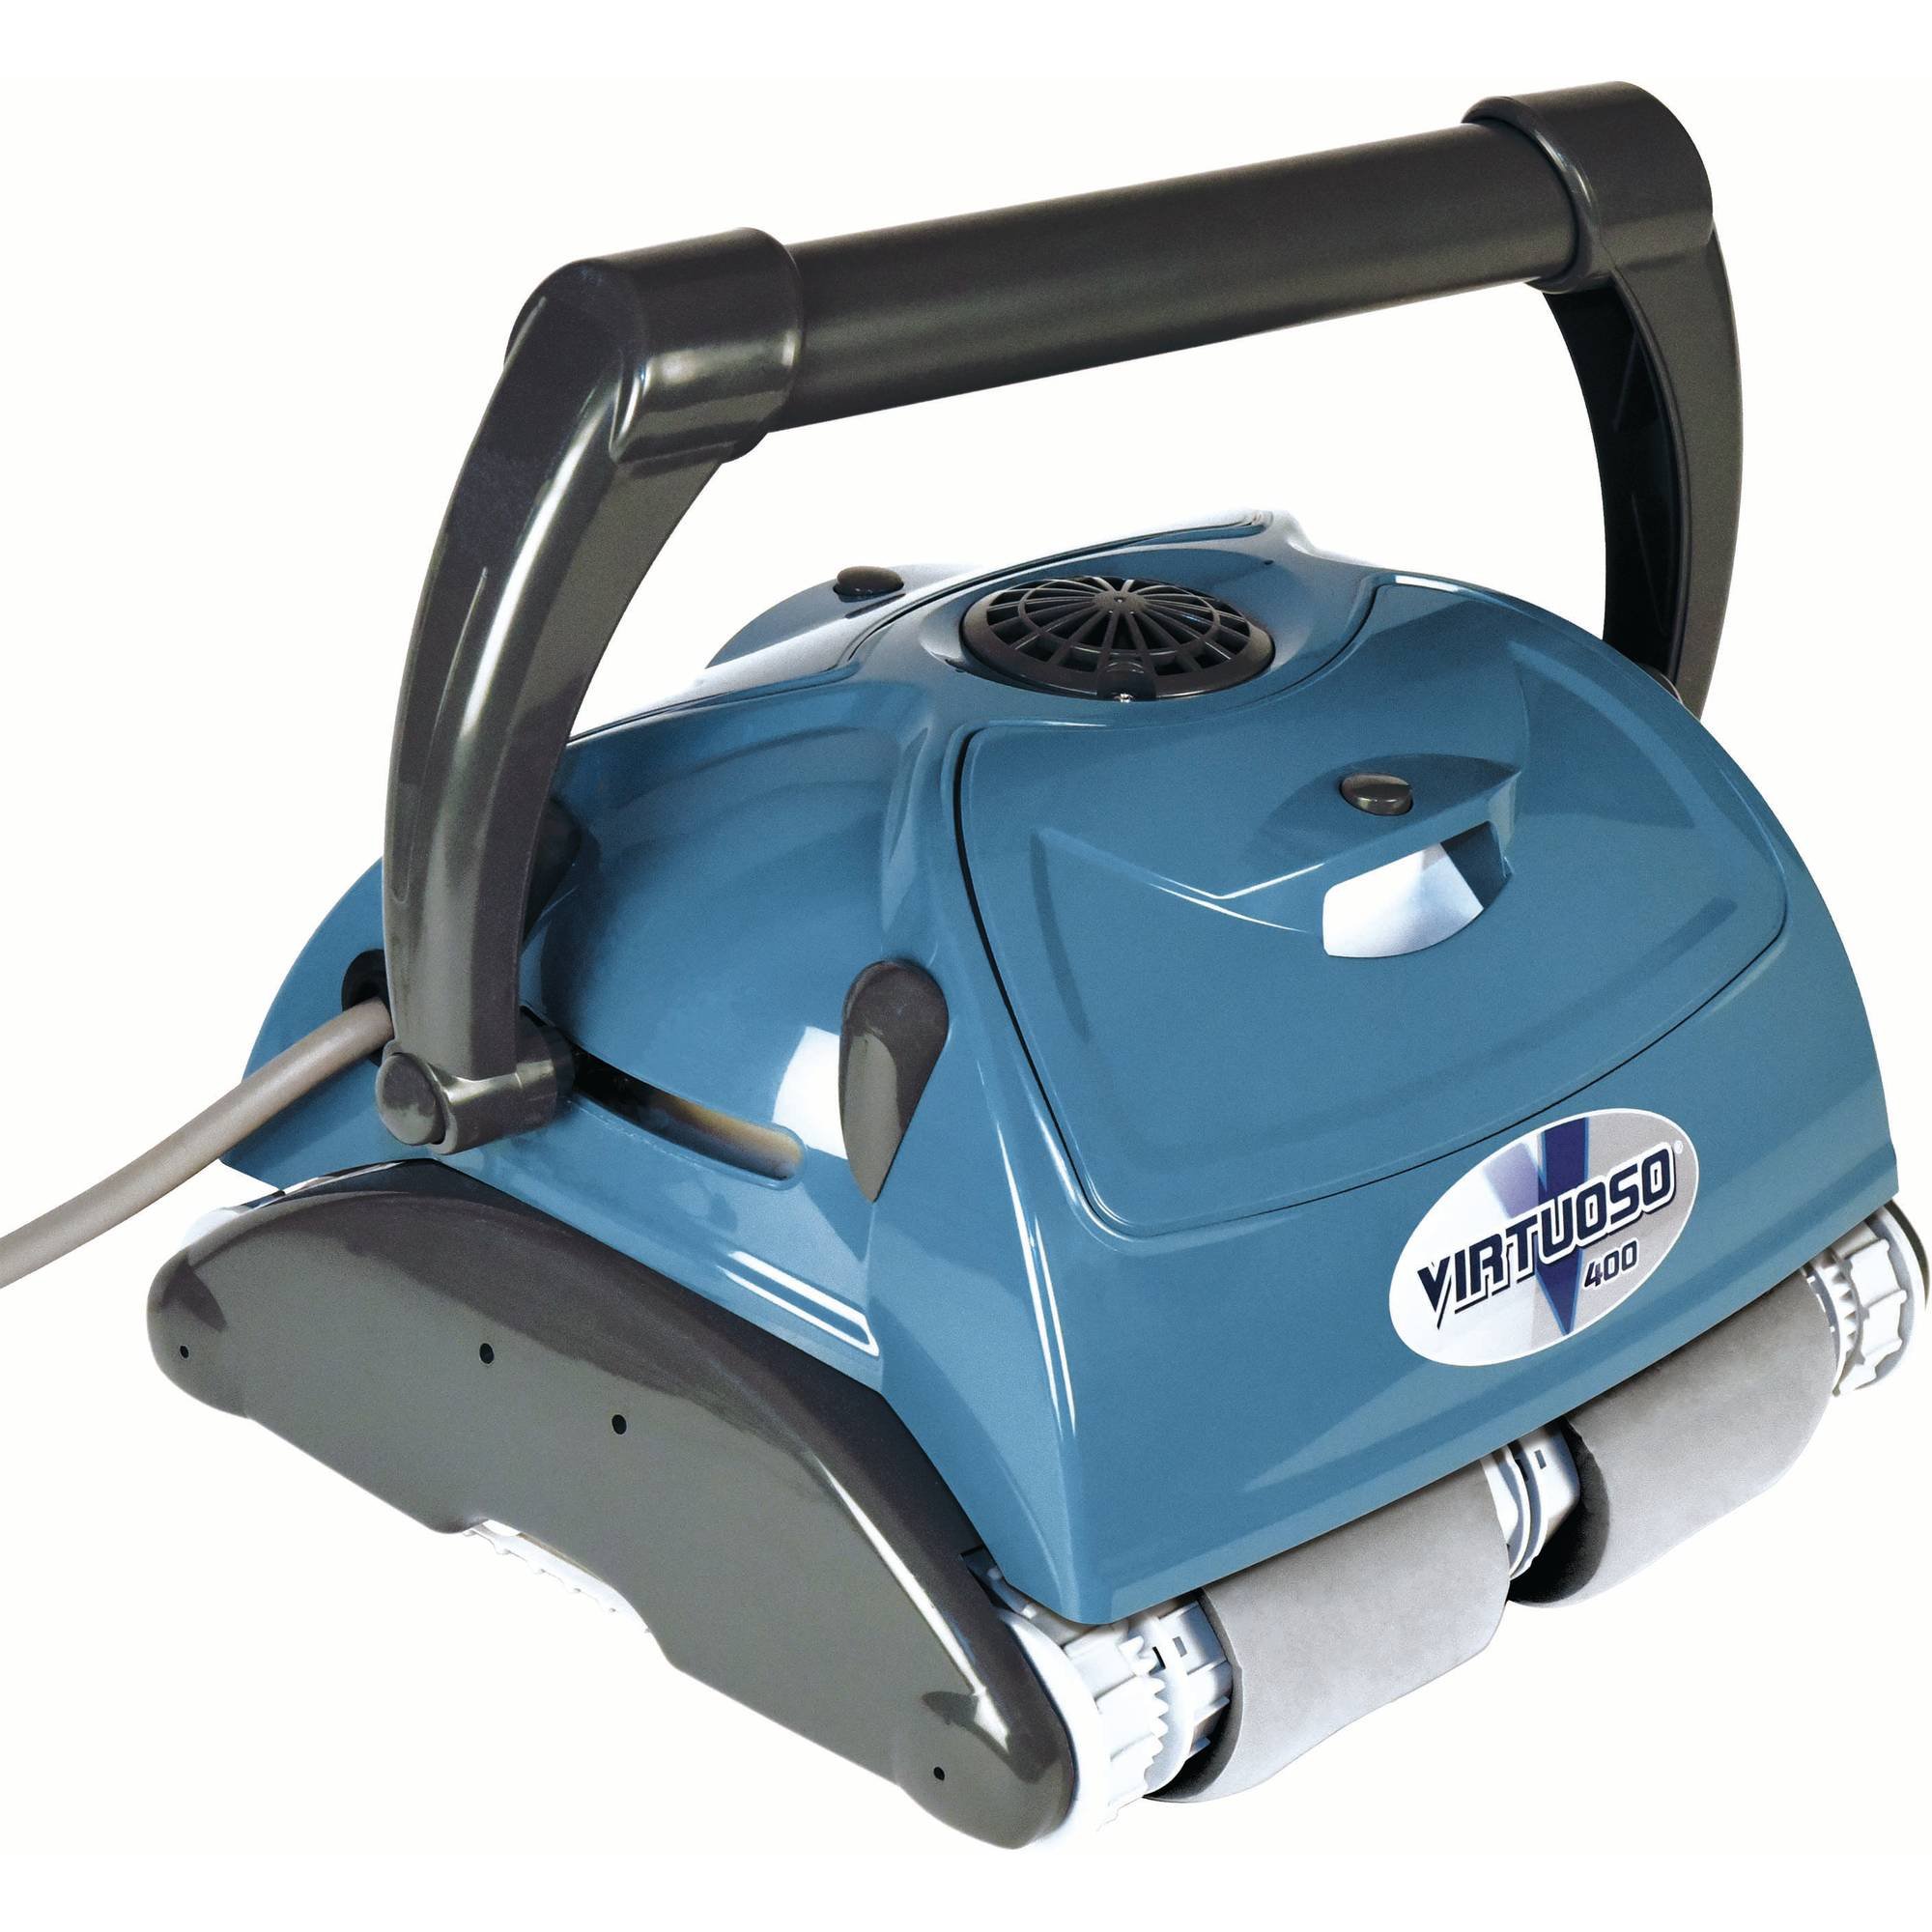 Poolcleaner Virtuoso 600A